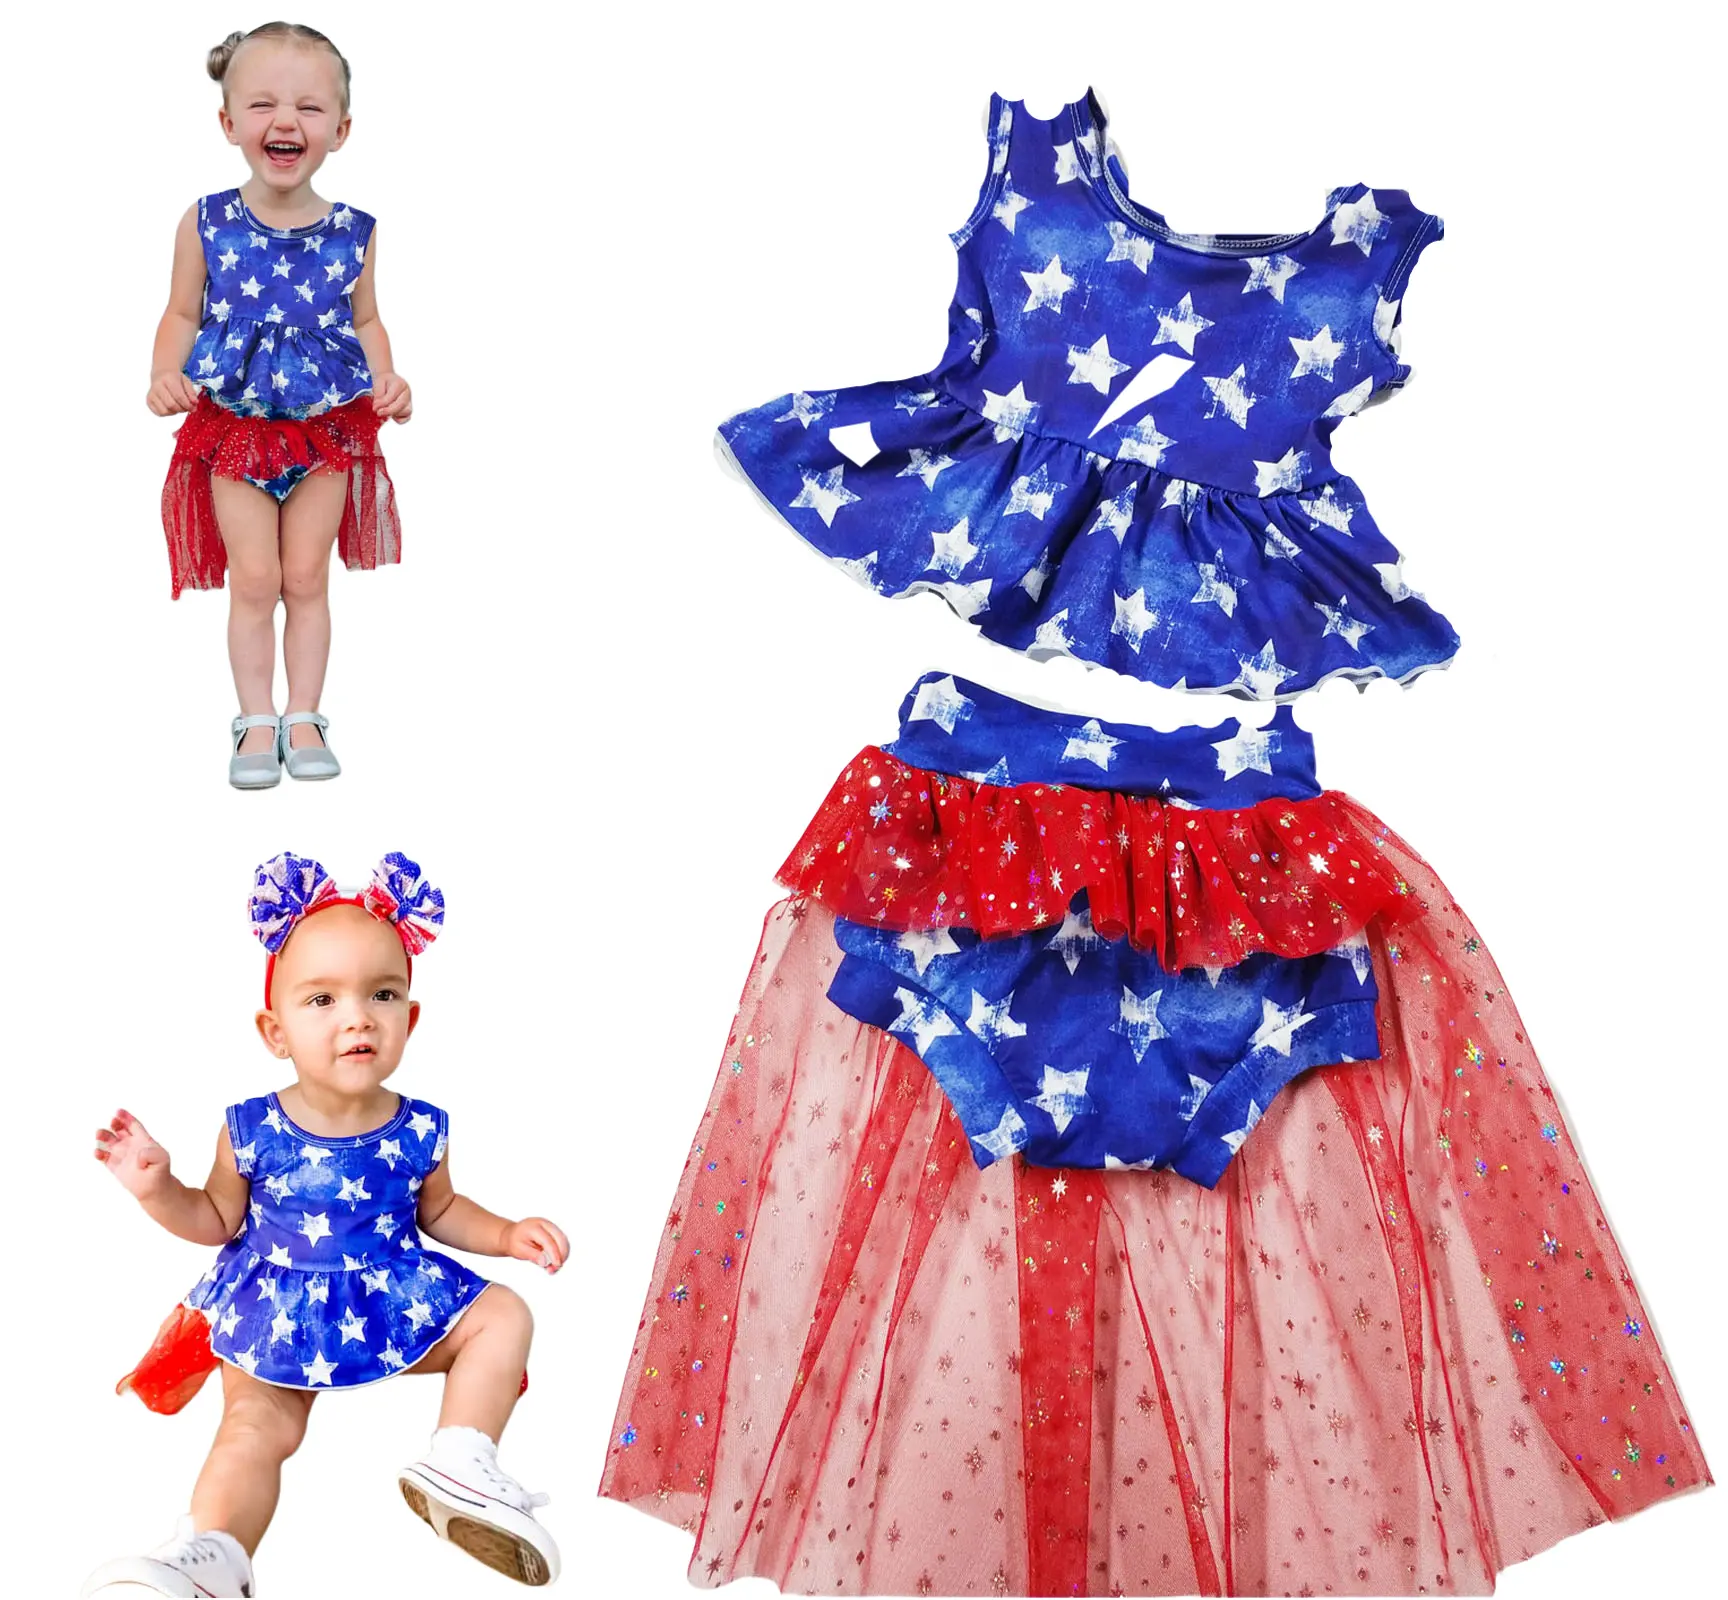 New Fashion 4th of july clothing Baby Girls Sequins Tutu Stars Printed Skirt Tutu Dresses suit For toddler kids